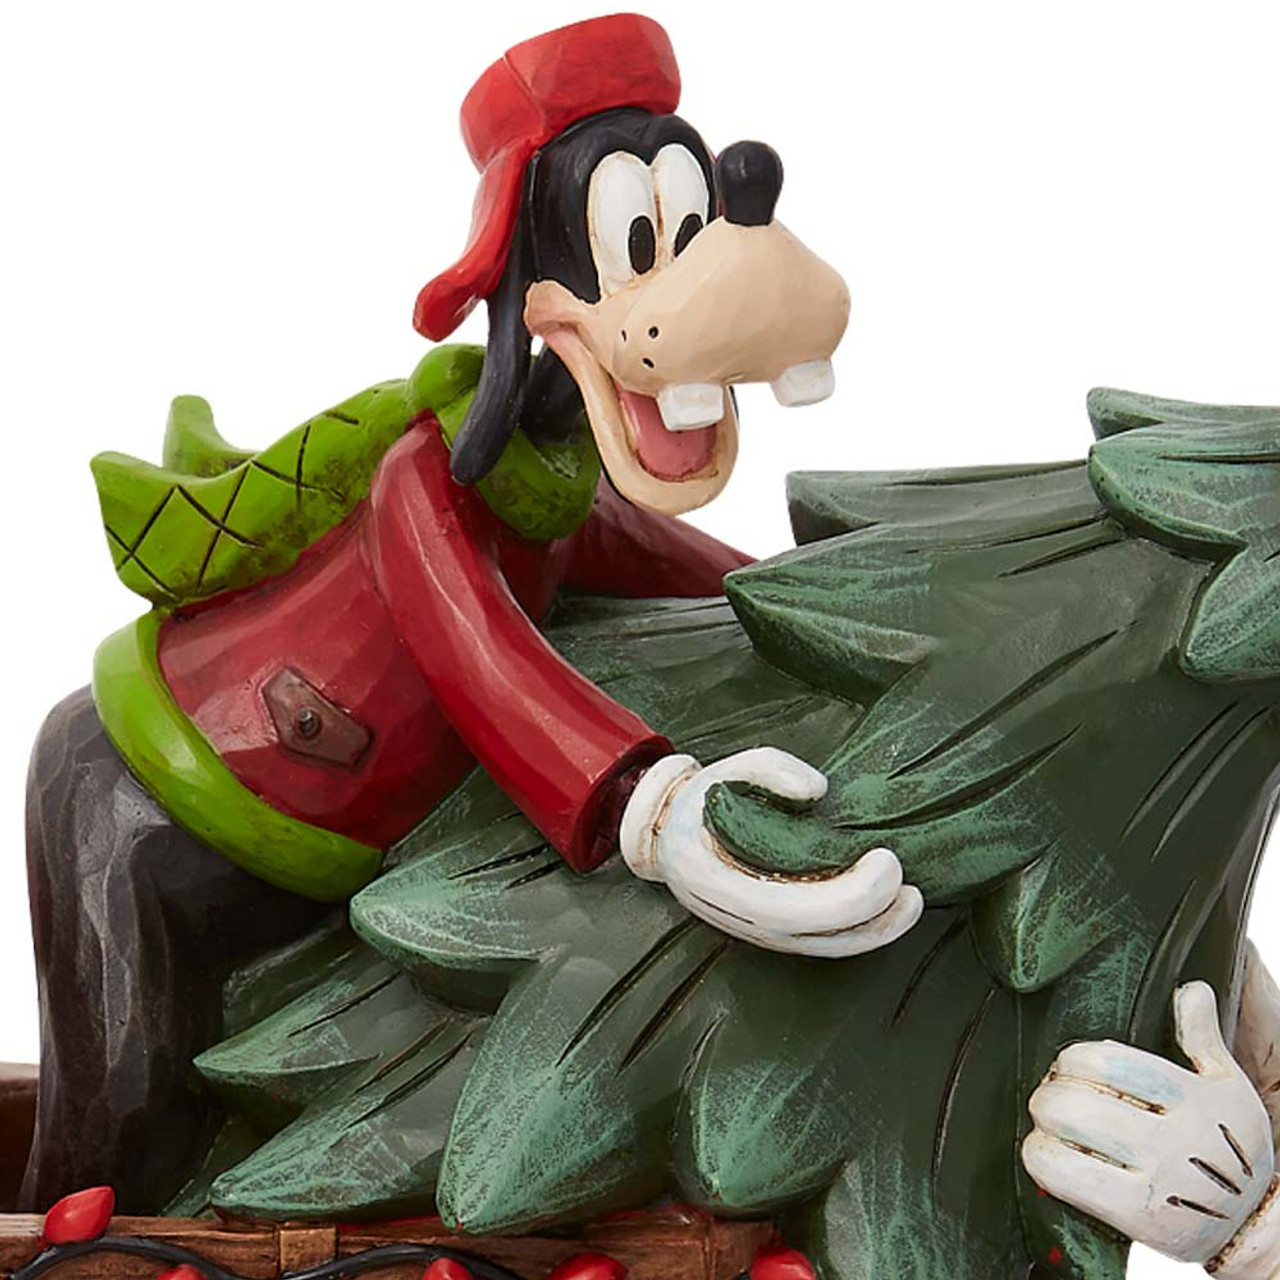 https://cdn11.bigcommerce.com/s-vmynke4q1q/images/stencil/1280x1280/products/4266/9201/6010868-Disney-Traditions-Red-Truck-Mickey-Friends-Christmas-Figurine-Jim-Shore-Goofy__02934.1667139990.jpg?c=1?imbypass=on